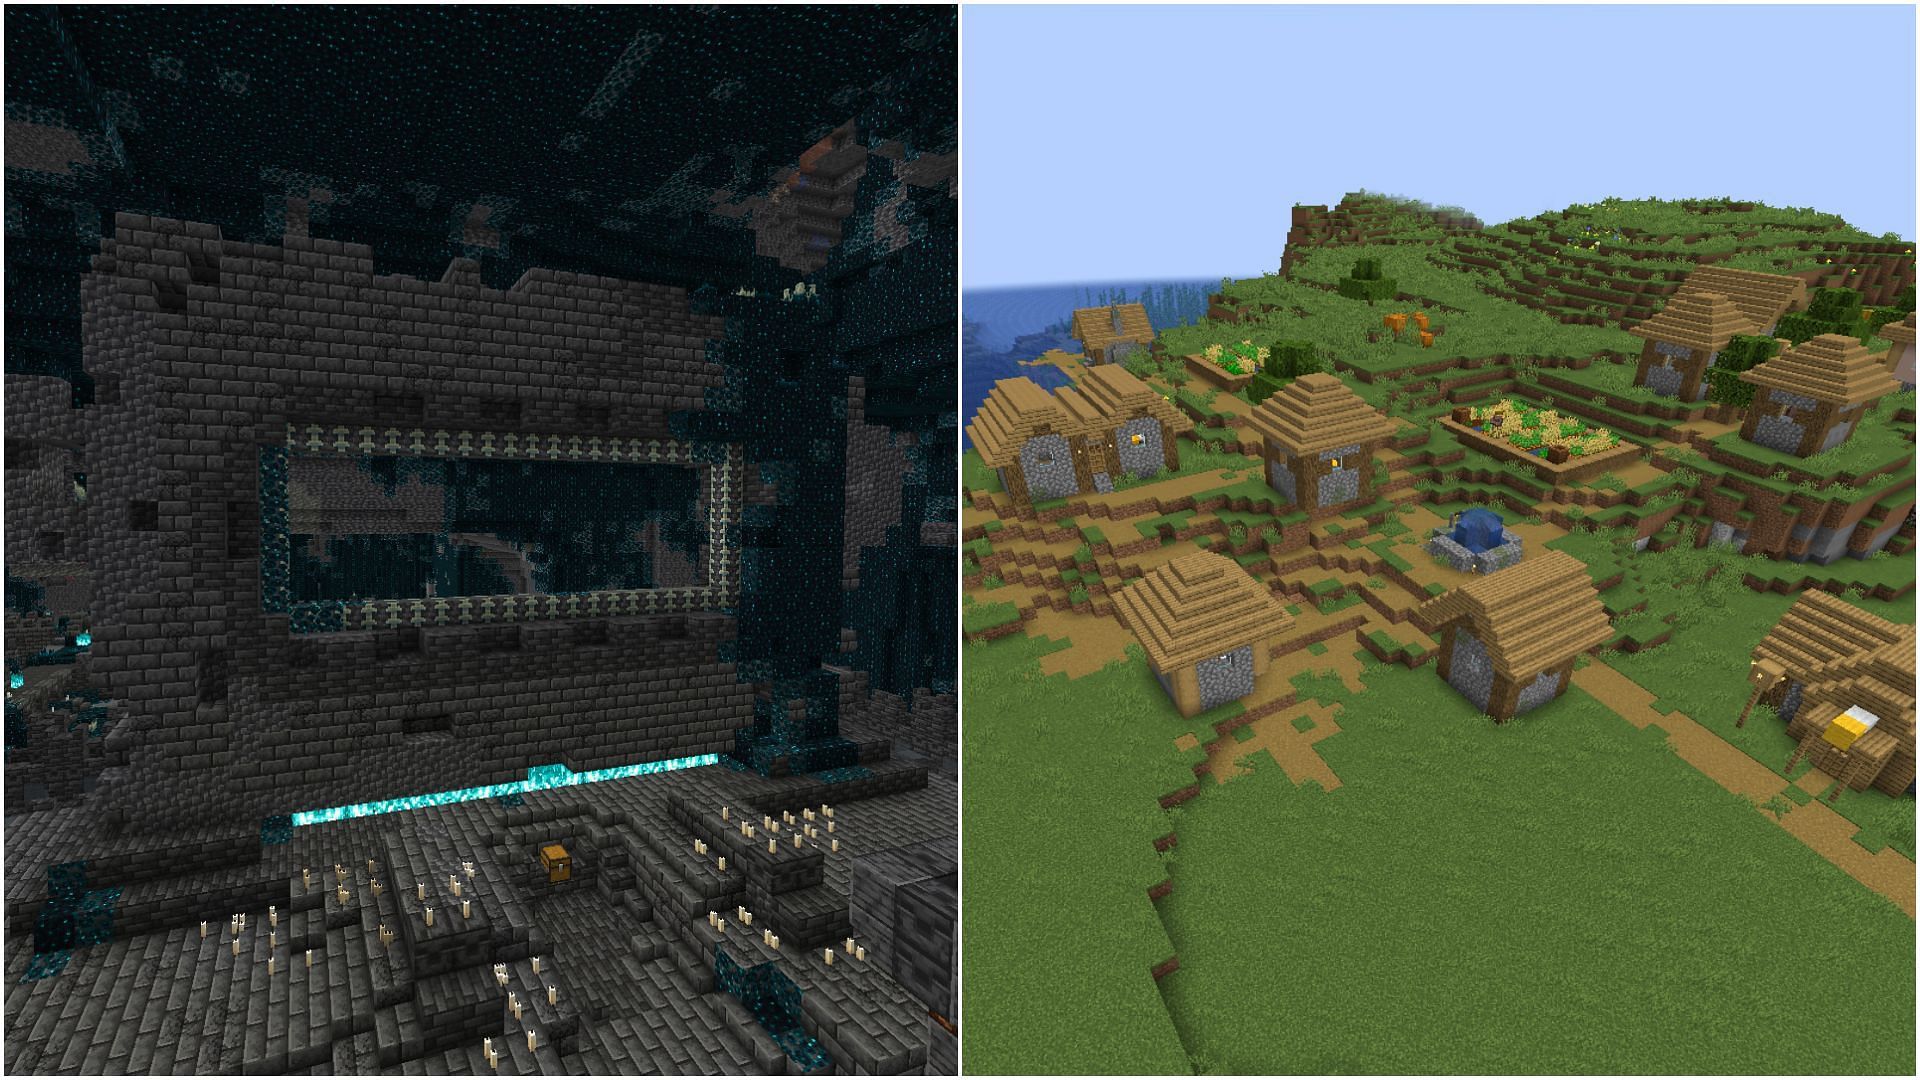 Custom seeds spawns players closer to special structures or biomes in Minecraft (Image via Sportskeeda)